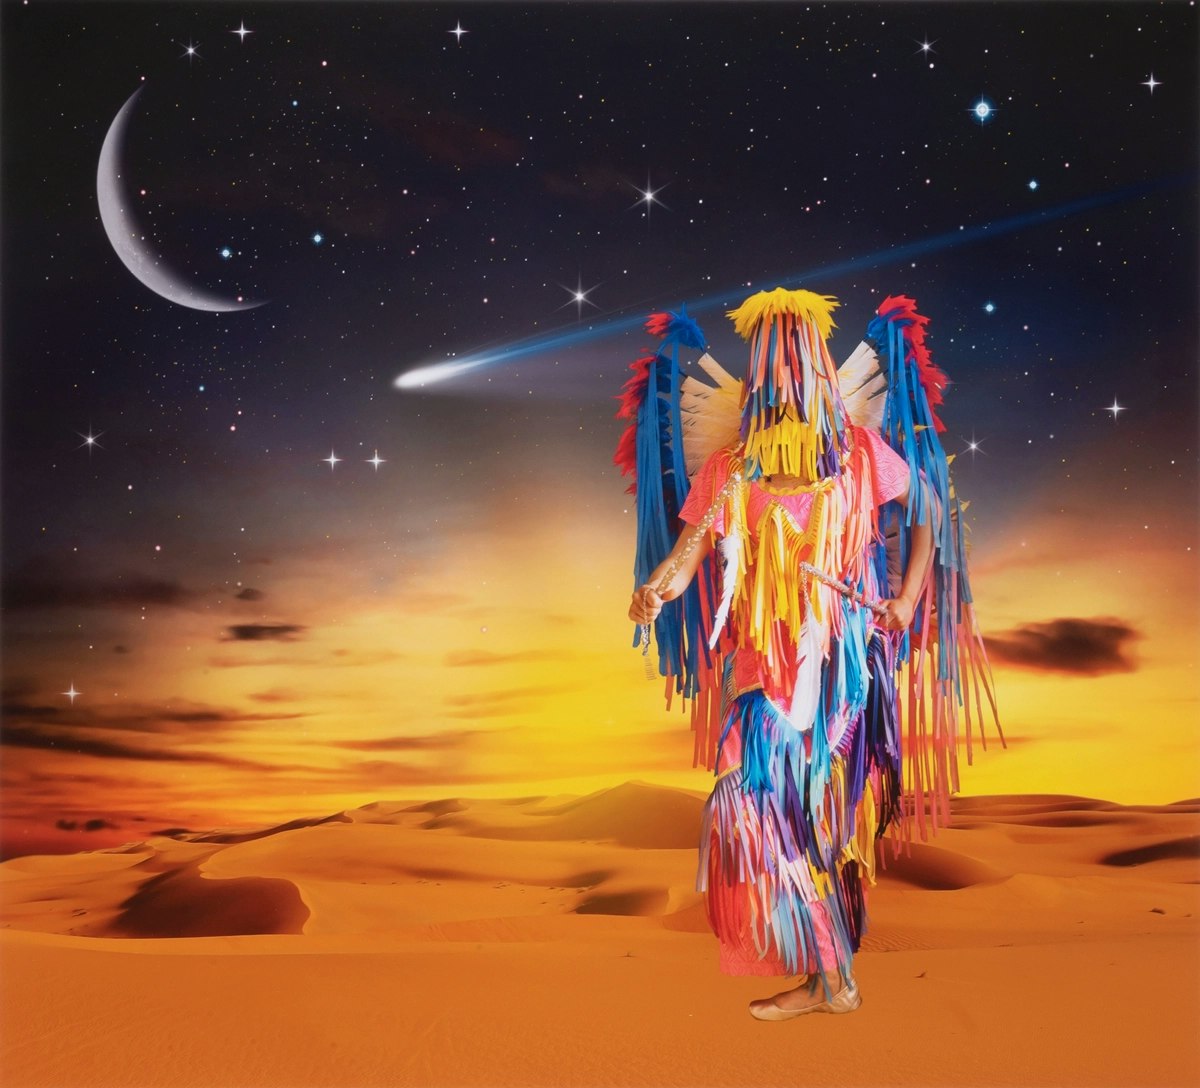 Person wearing bright, colorful Native regalia, stands against a sandy desert landscape with a starry sky, a large crescent moon, and a shooting star.